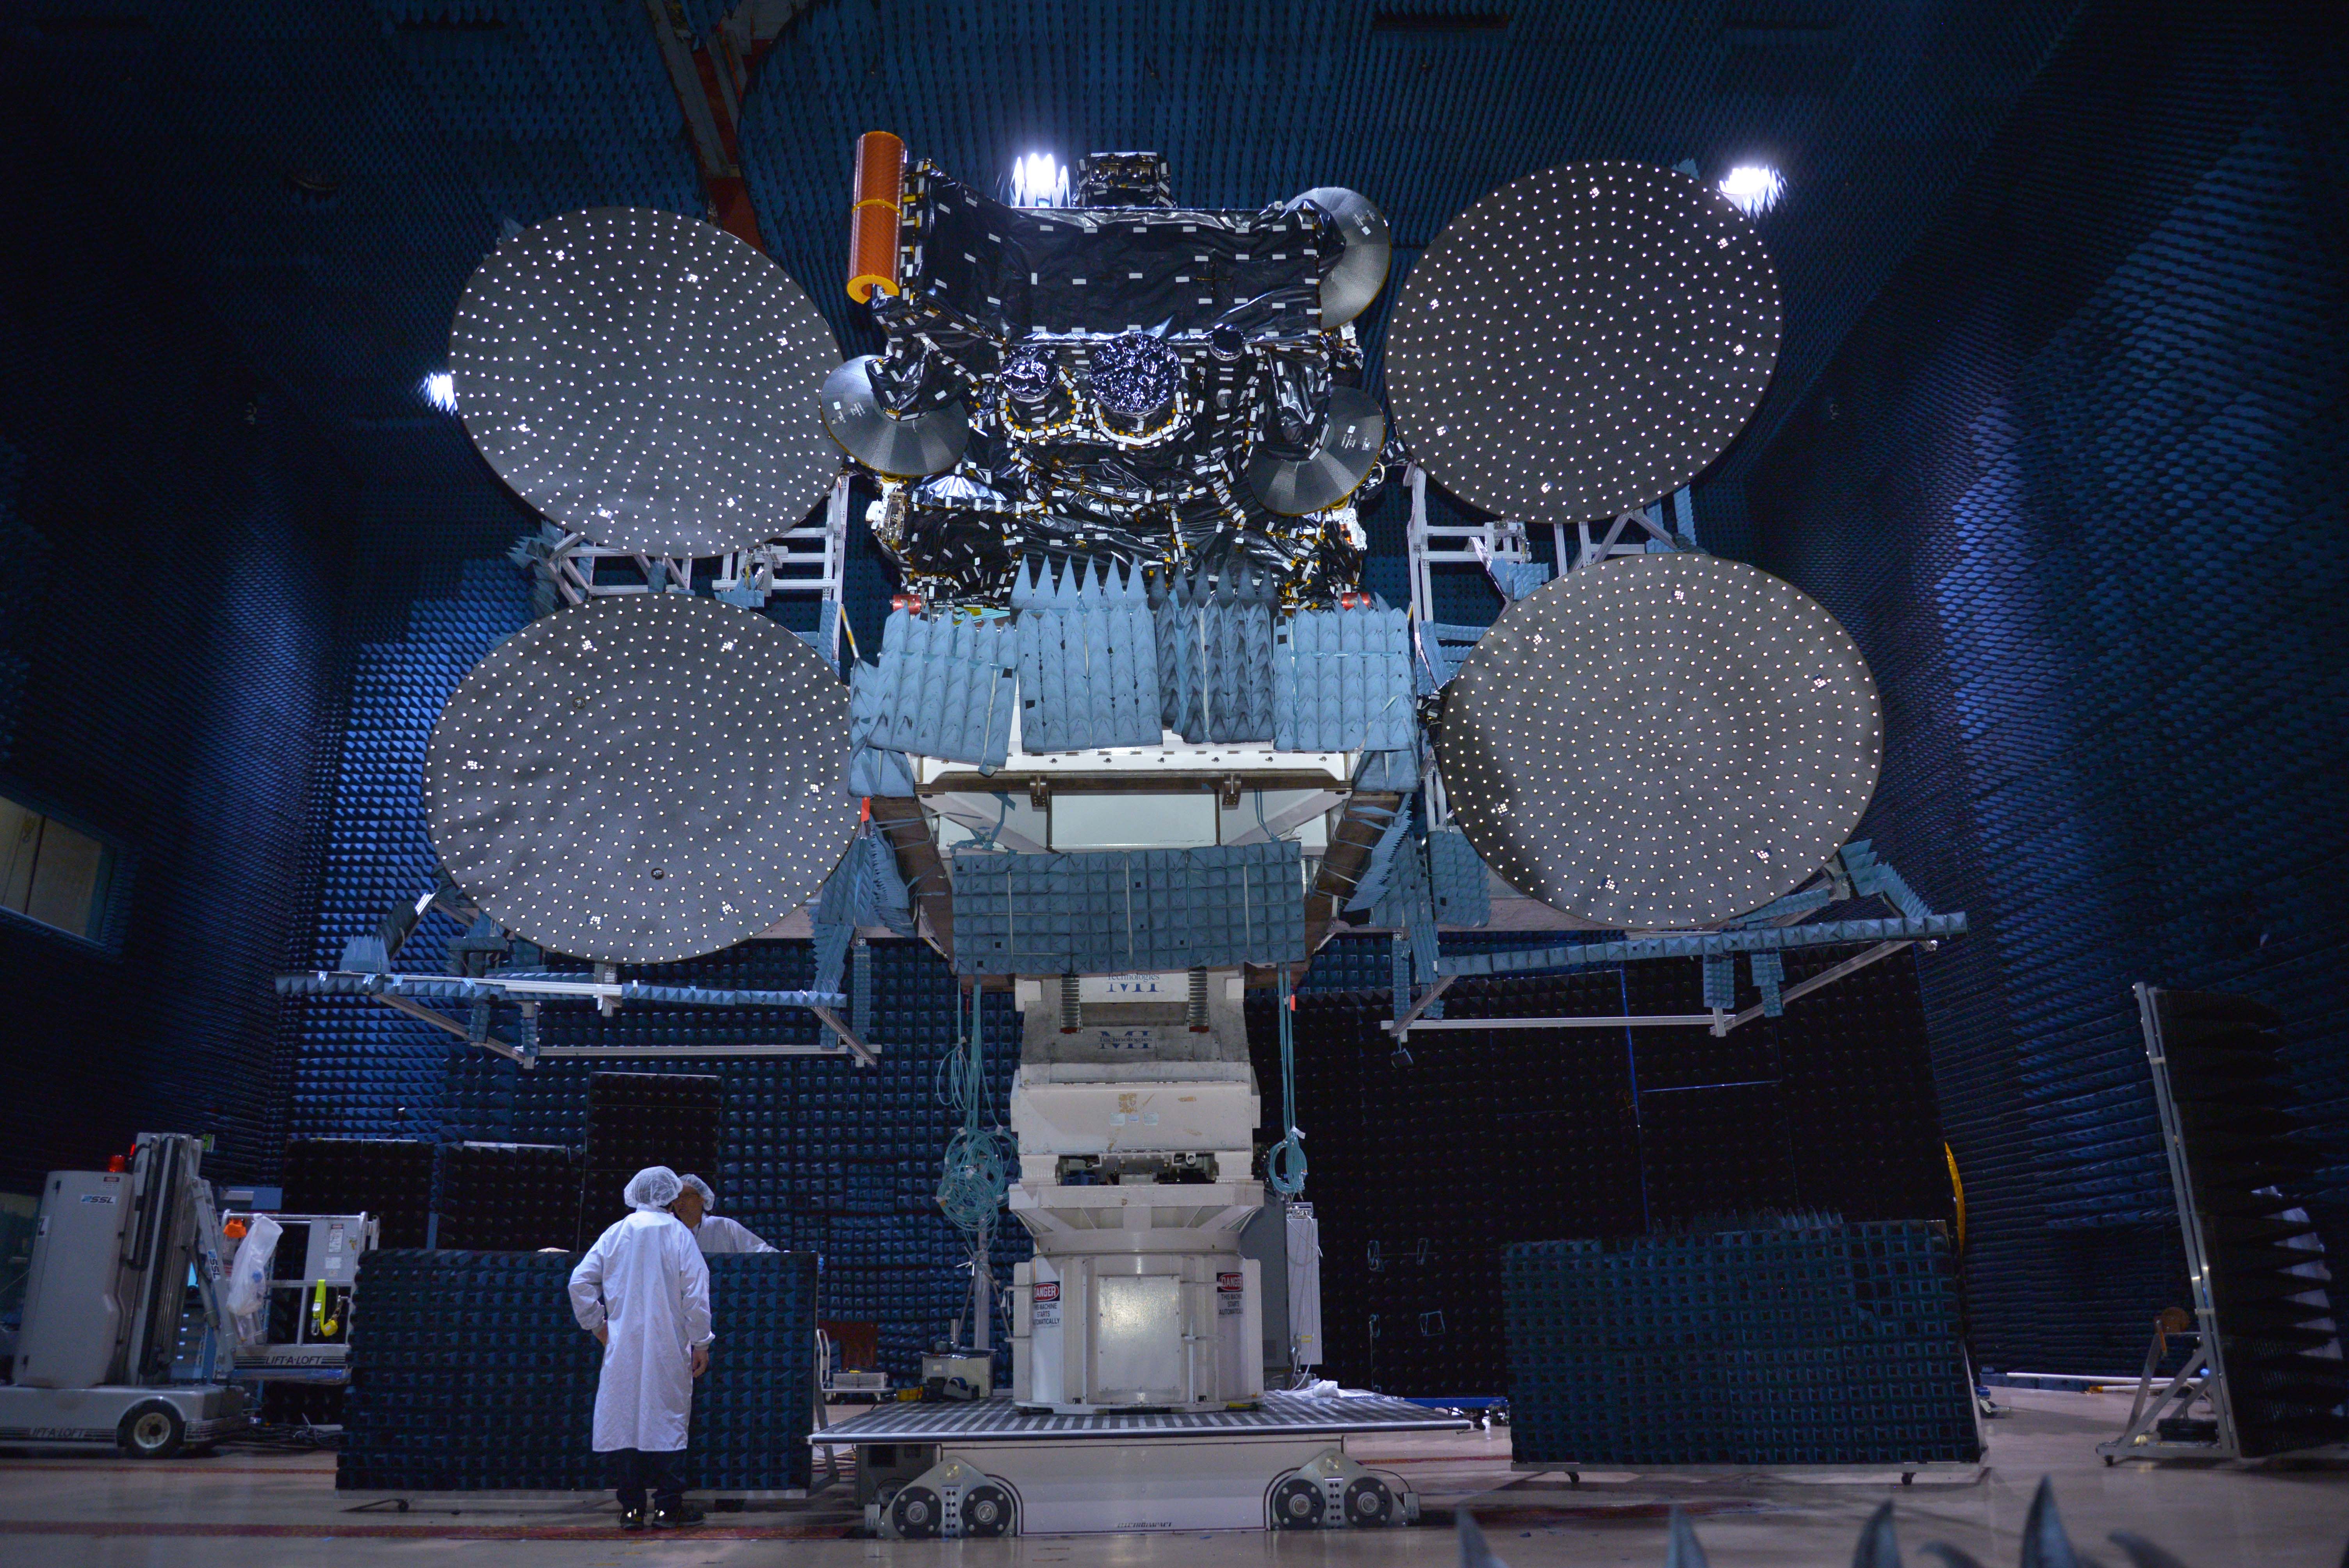 Star One C4 in SSL's Compact Antenna Test Range (CATR) facility